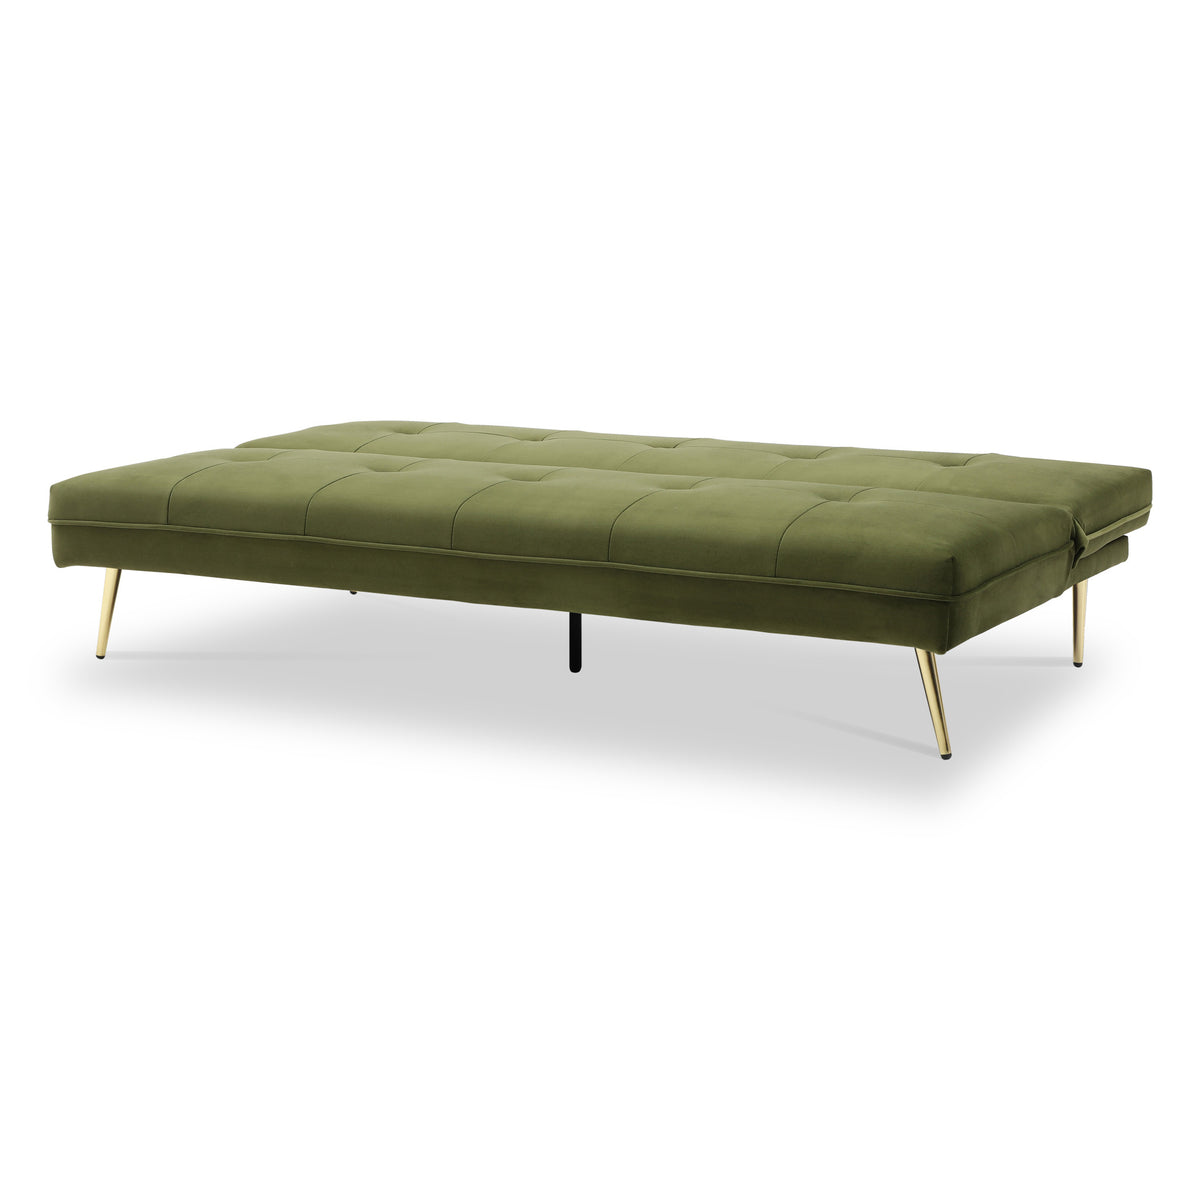 Sadie Click Clack Sofa Bed in Olive by Roseland Furniture